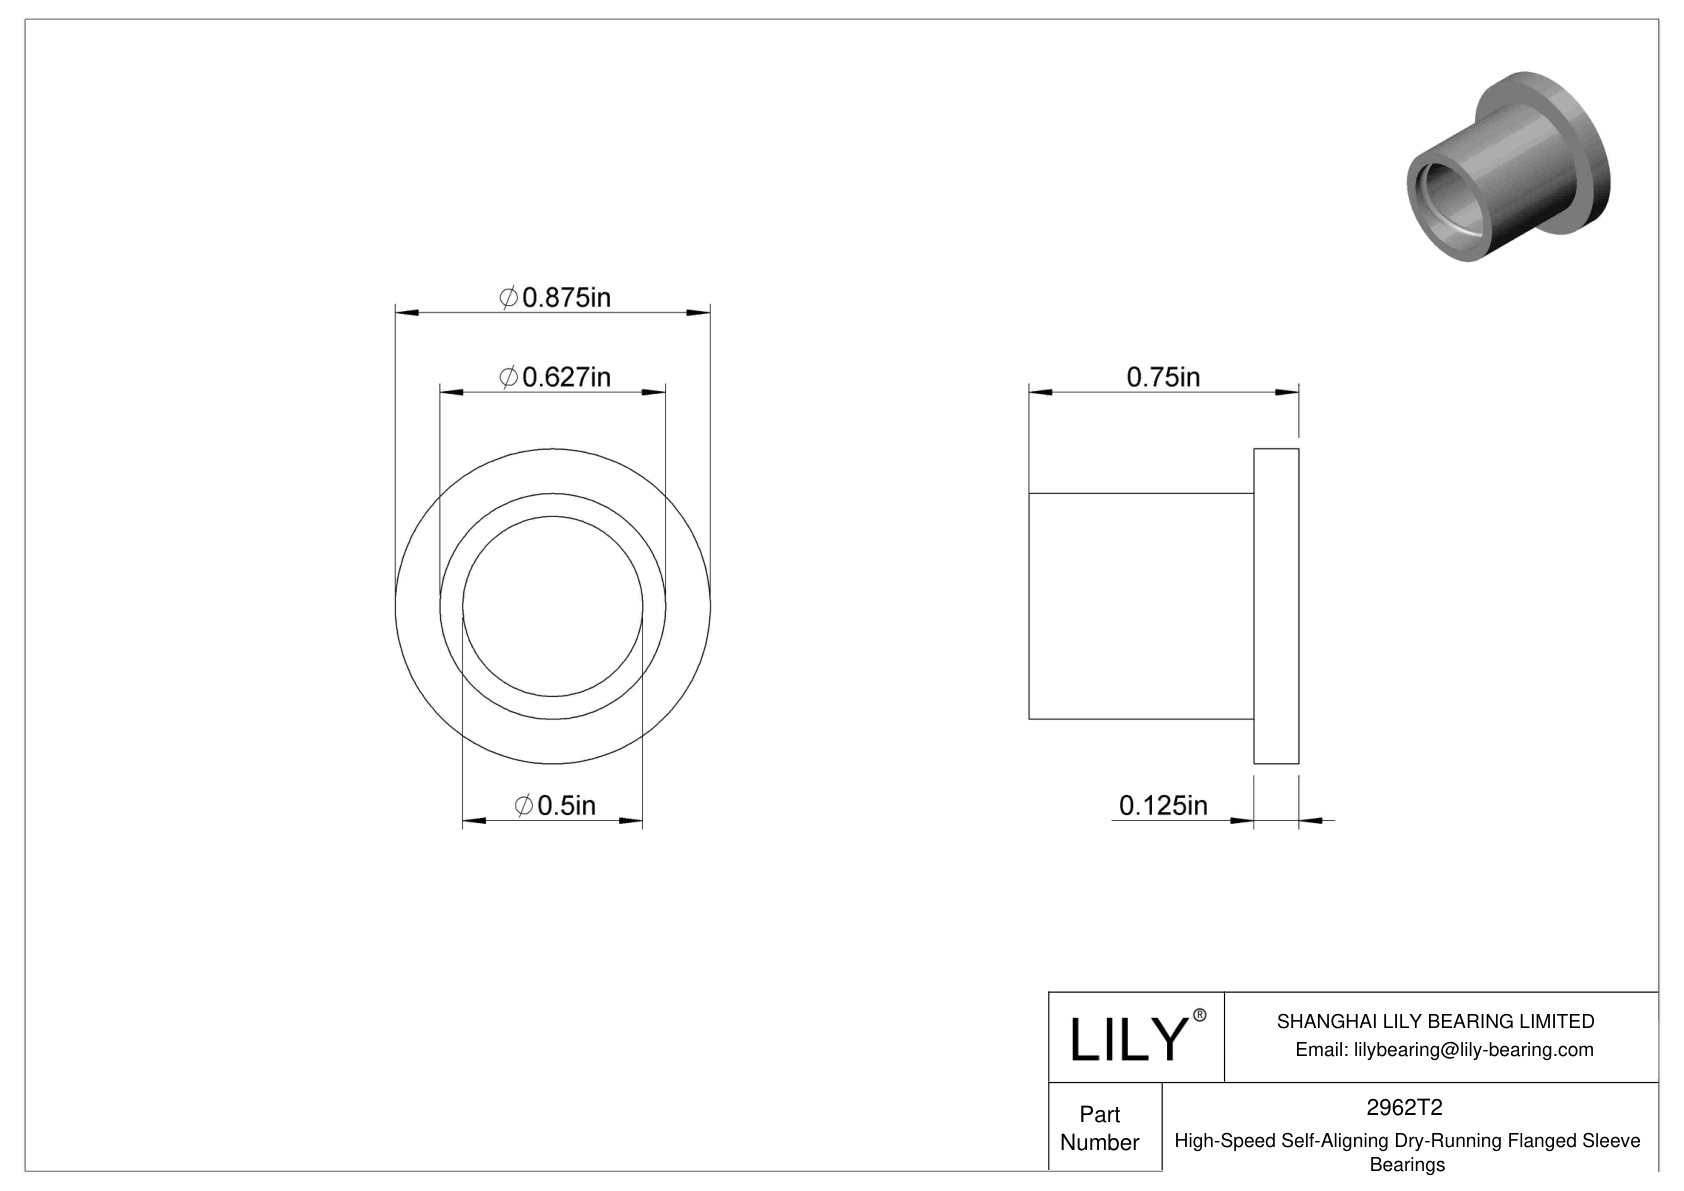 CJGCTC High-Temperature Dry-Running Flanged Sleeve Bearings cad drawing